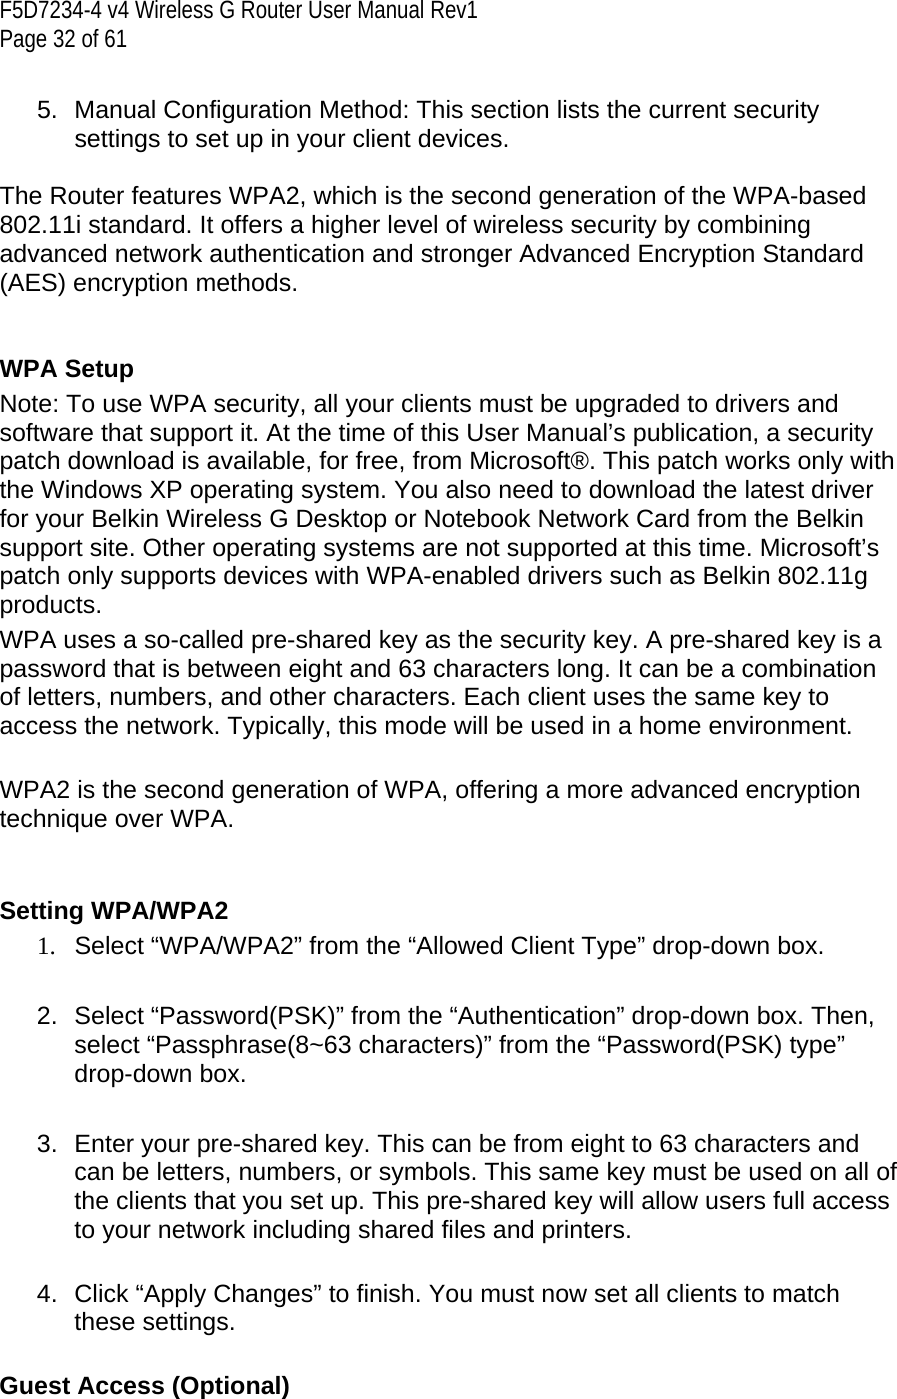 F5D7234-4 v4 Wireless G Router User Manual Rev1  Page 32 of 61   5. Manual Configuration Method: This section lists the current security settings to set up in your client devices.  The Router features WPA2, which is the second generation of the WPA-based 802.11i standard. It offers a higher level of wireless security by combining advanced network authentication and stronger Advanced Encryption Standard (AES) encryption methods.   WPA Setup Note: To use WPA security, all your clients must be upgraded to drivers and software that support it. At the time of this User Manual’s publication, a security patch download is available, for free, from Microsoft®. This patch works only with the Windows XP operating system. You also need to download the latest driver for your Belkin Wireless G Desktop or Notebook Network Card from the Belkin support site. Other operating systems are not supported at this time. Microsoft’s patch only supports devices with WPA-enabled drivers such as Belkin 802.11g products. WPA uses a so-called pre-shared key as the security key. A pre-shared key is a password that is between eight and 63 characters long. It can be a combination of letters, numbers, and other characters. Each client uses the same key to access the network. Typically, this mode will be used in a home environment.  WPA2 is the second generation of WPA, offering a more advanced encryption technique over WPA.     Setting WPA/WPA2  1.  Select “WPA/WPA2” from the “Allowed Client Type” drop-down box.    2.  Select “Password(PSK)” from the “Authentication” drop-down box. Then, select “Passphrase(8~63 characters)” from the “Password(PSK) type” drop-down box.  3.  Enter your pre-shared key. This can be from eight to 63 characters and can be letters, numbers, or symbols. This same key must be used on all of the clients that you set up. This pre-shared key will allow users full access to your network including shared files and printers.  4.  Click “Apply Changes” to finish. You must now set all clients to match these settings.  Guest Access (Optional)  